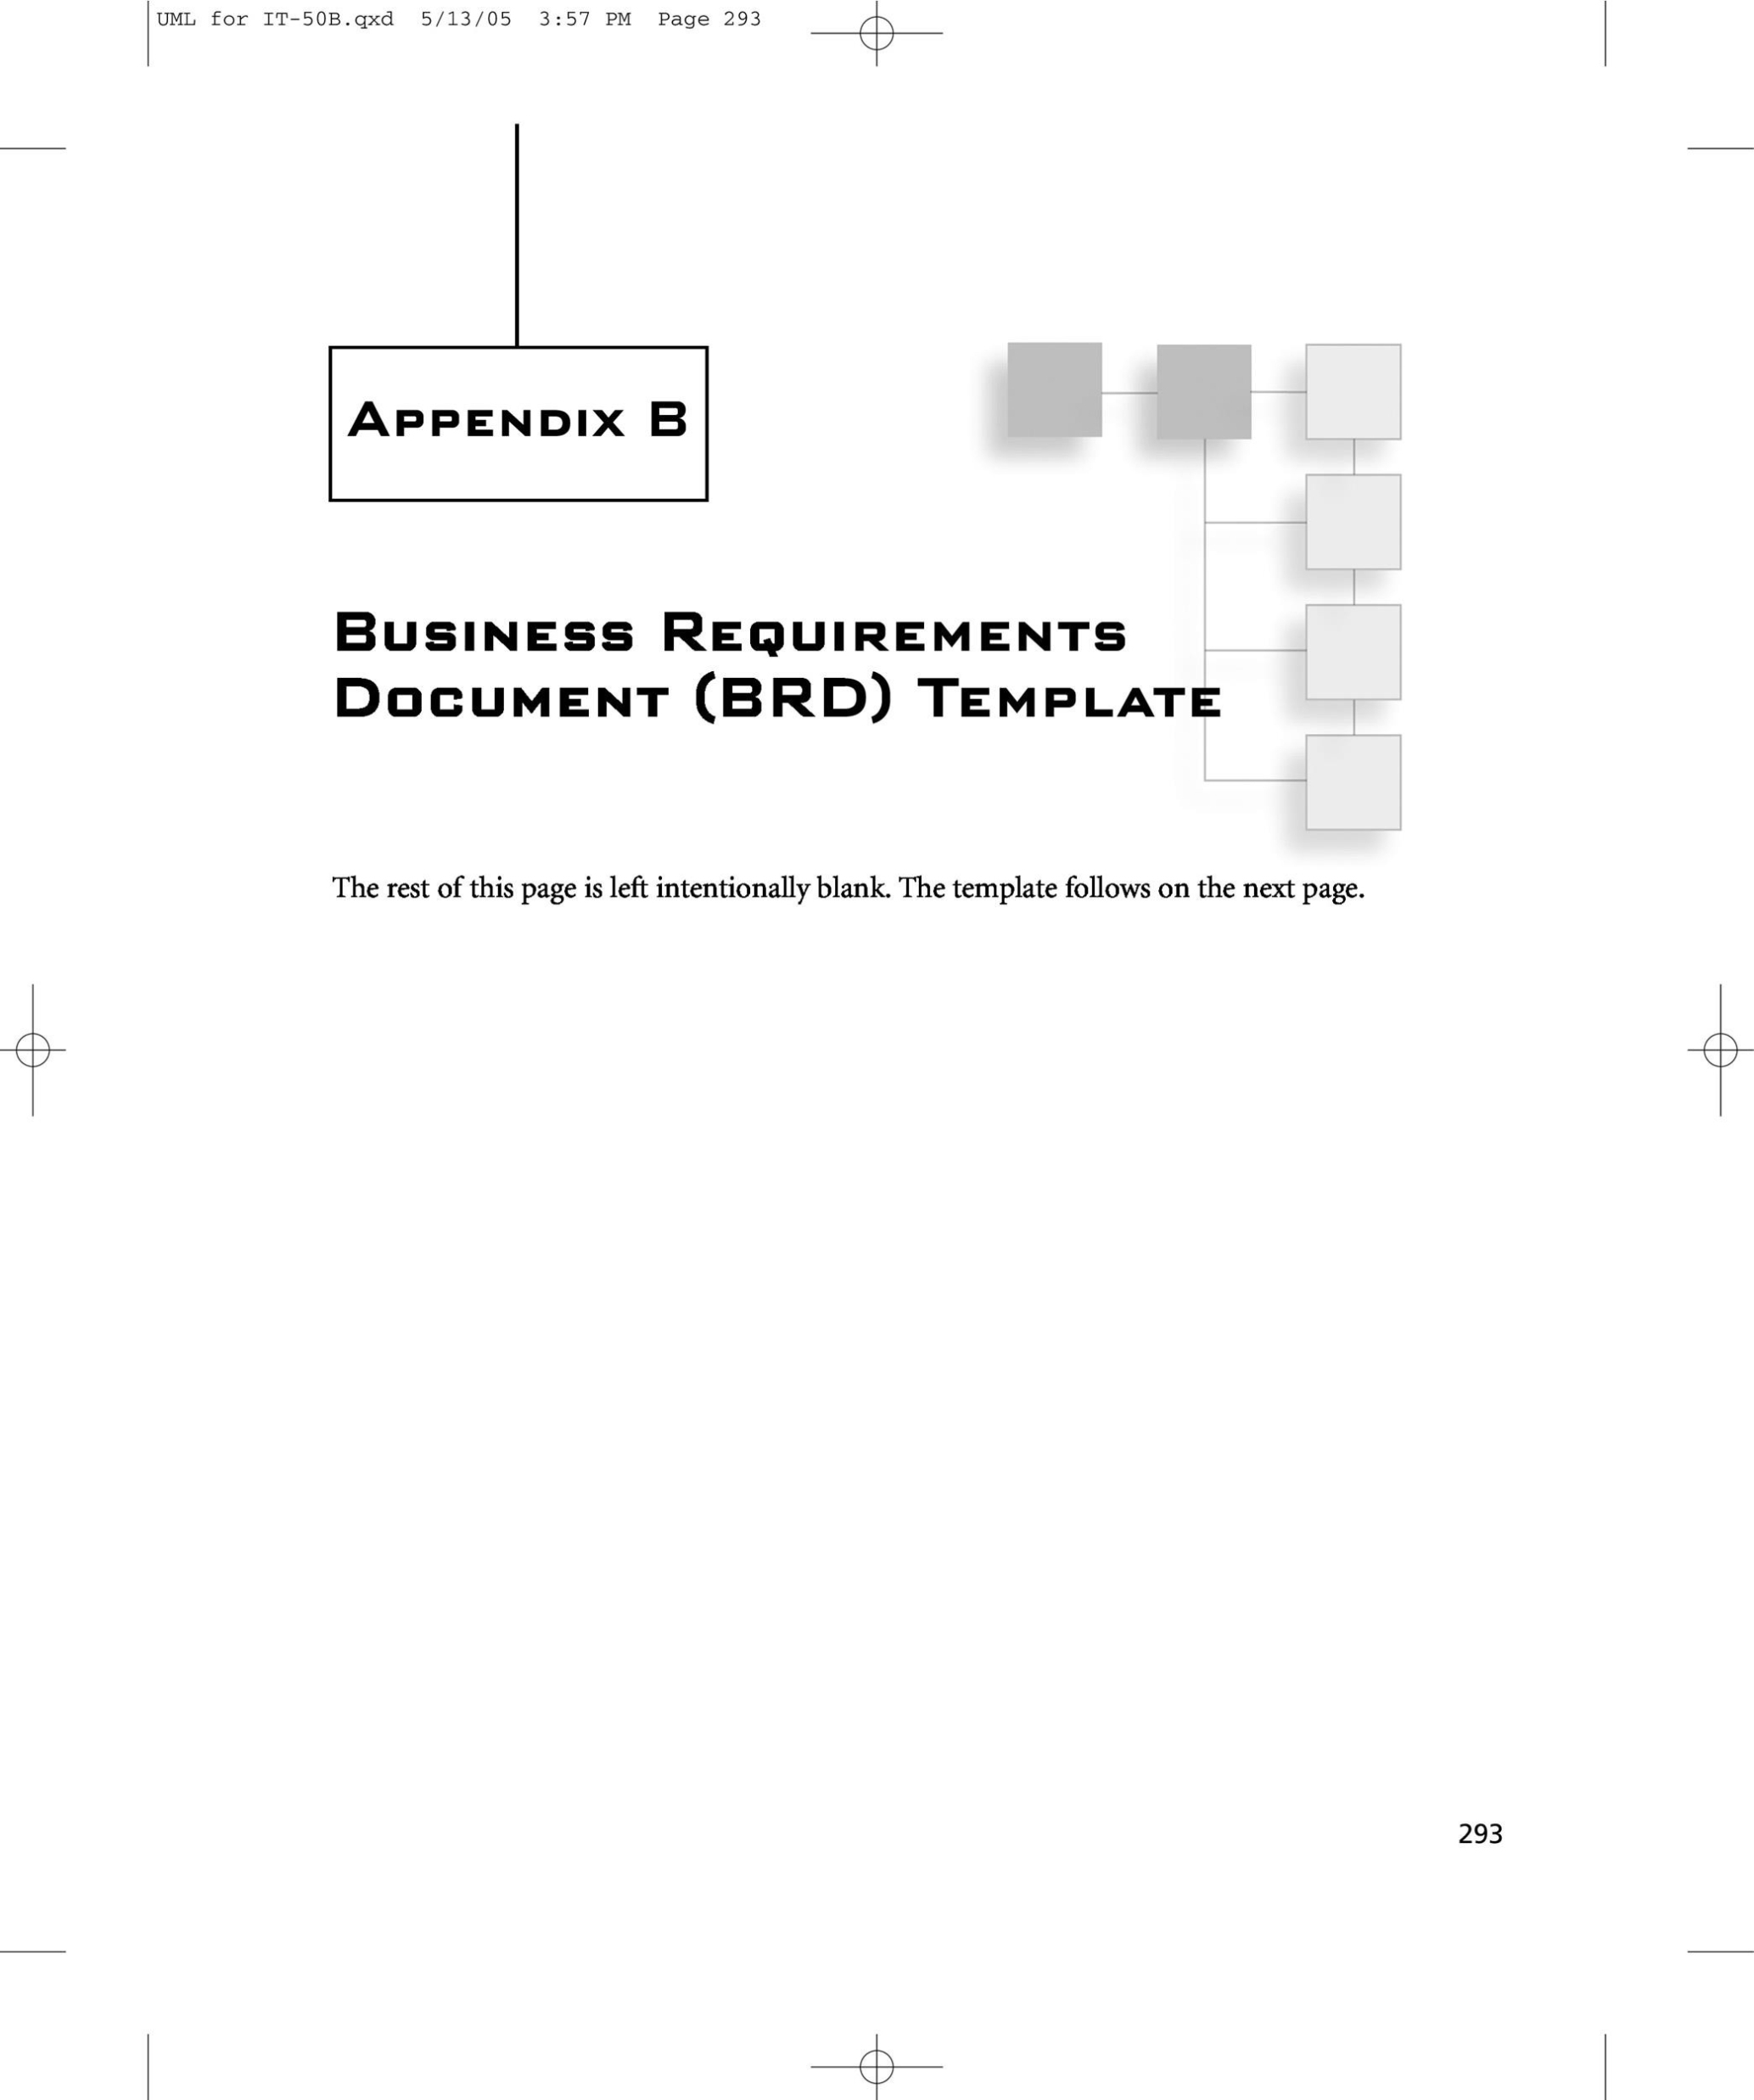 40+ Simple Business Requirements Document Templates ᐅ Templatelab Intended For Sample Business Requirement Document Template